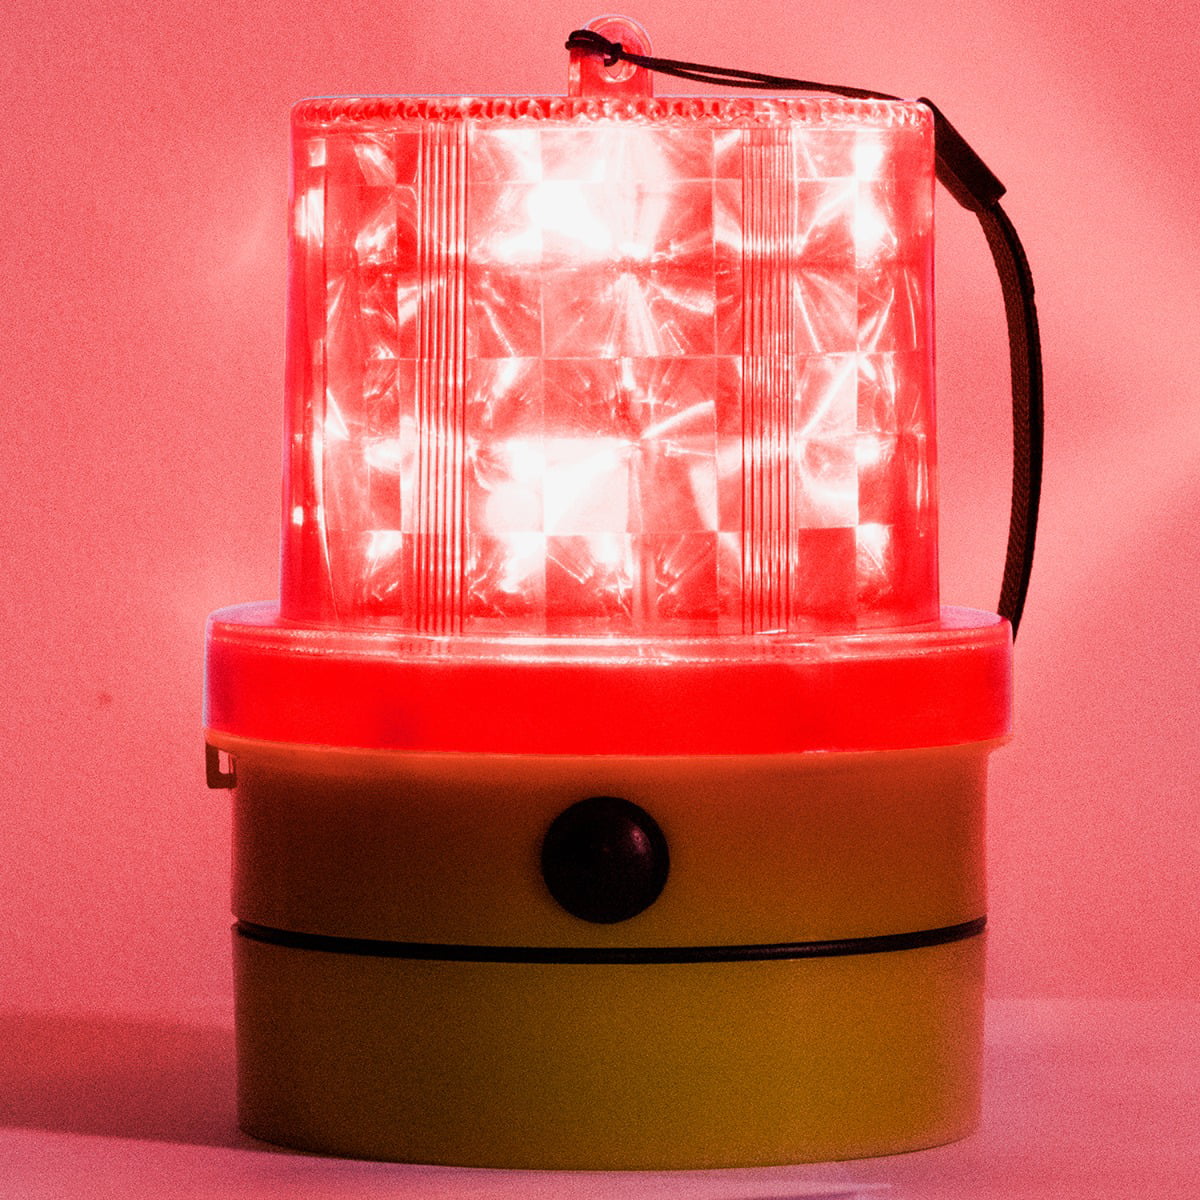 And Battery-Operated VULCAN Amber LED Emergency Warning Beacon Magnetic 24 LEDs Operates In Low Light Or Dark Conditions Only Portable Photocell Technology 